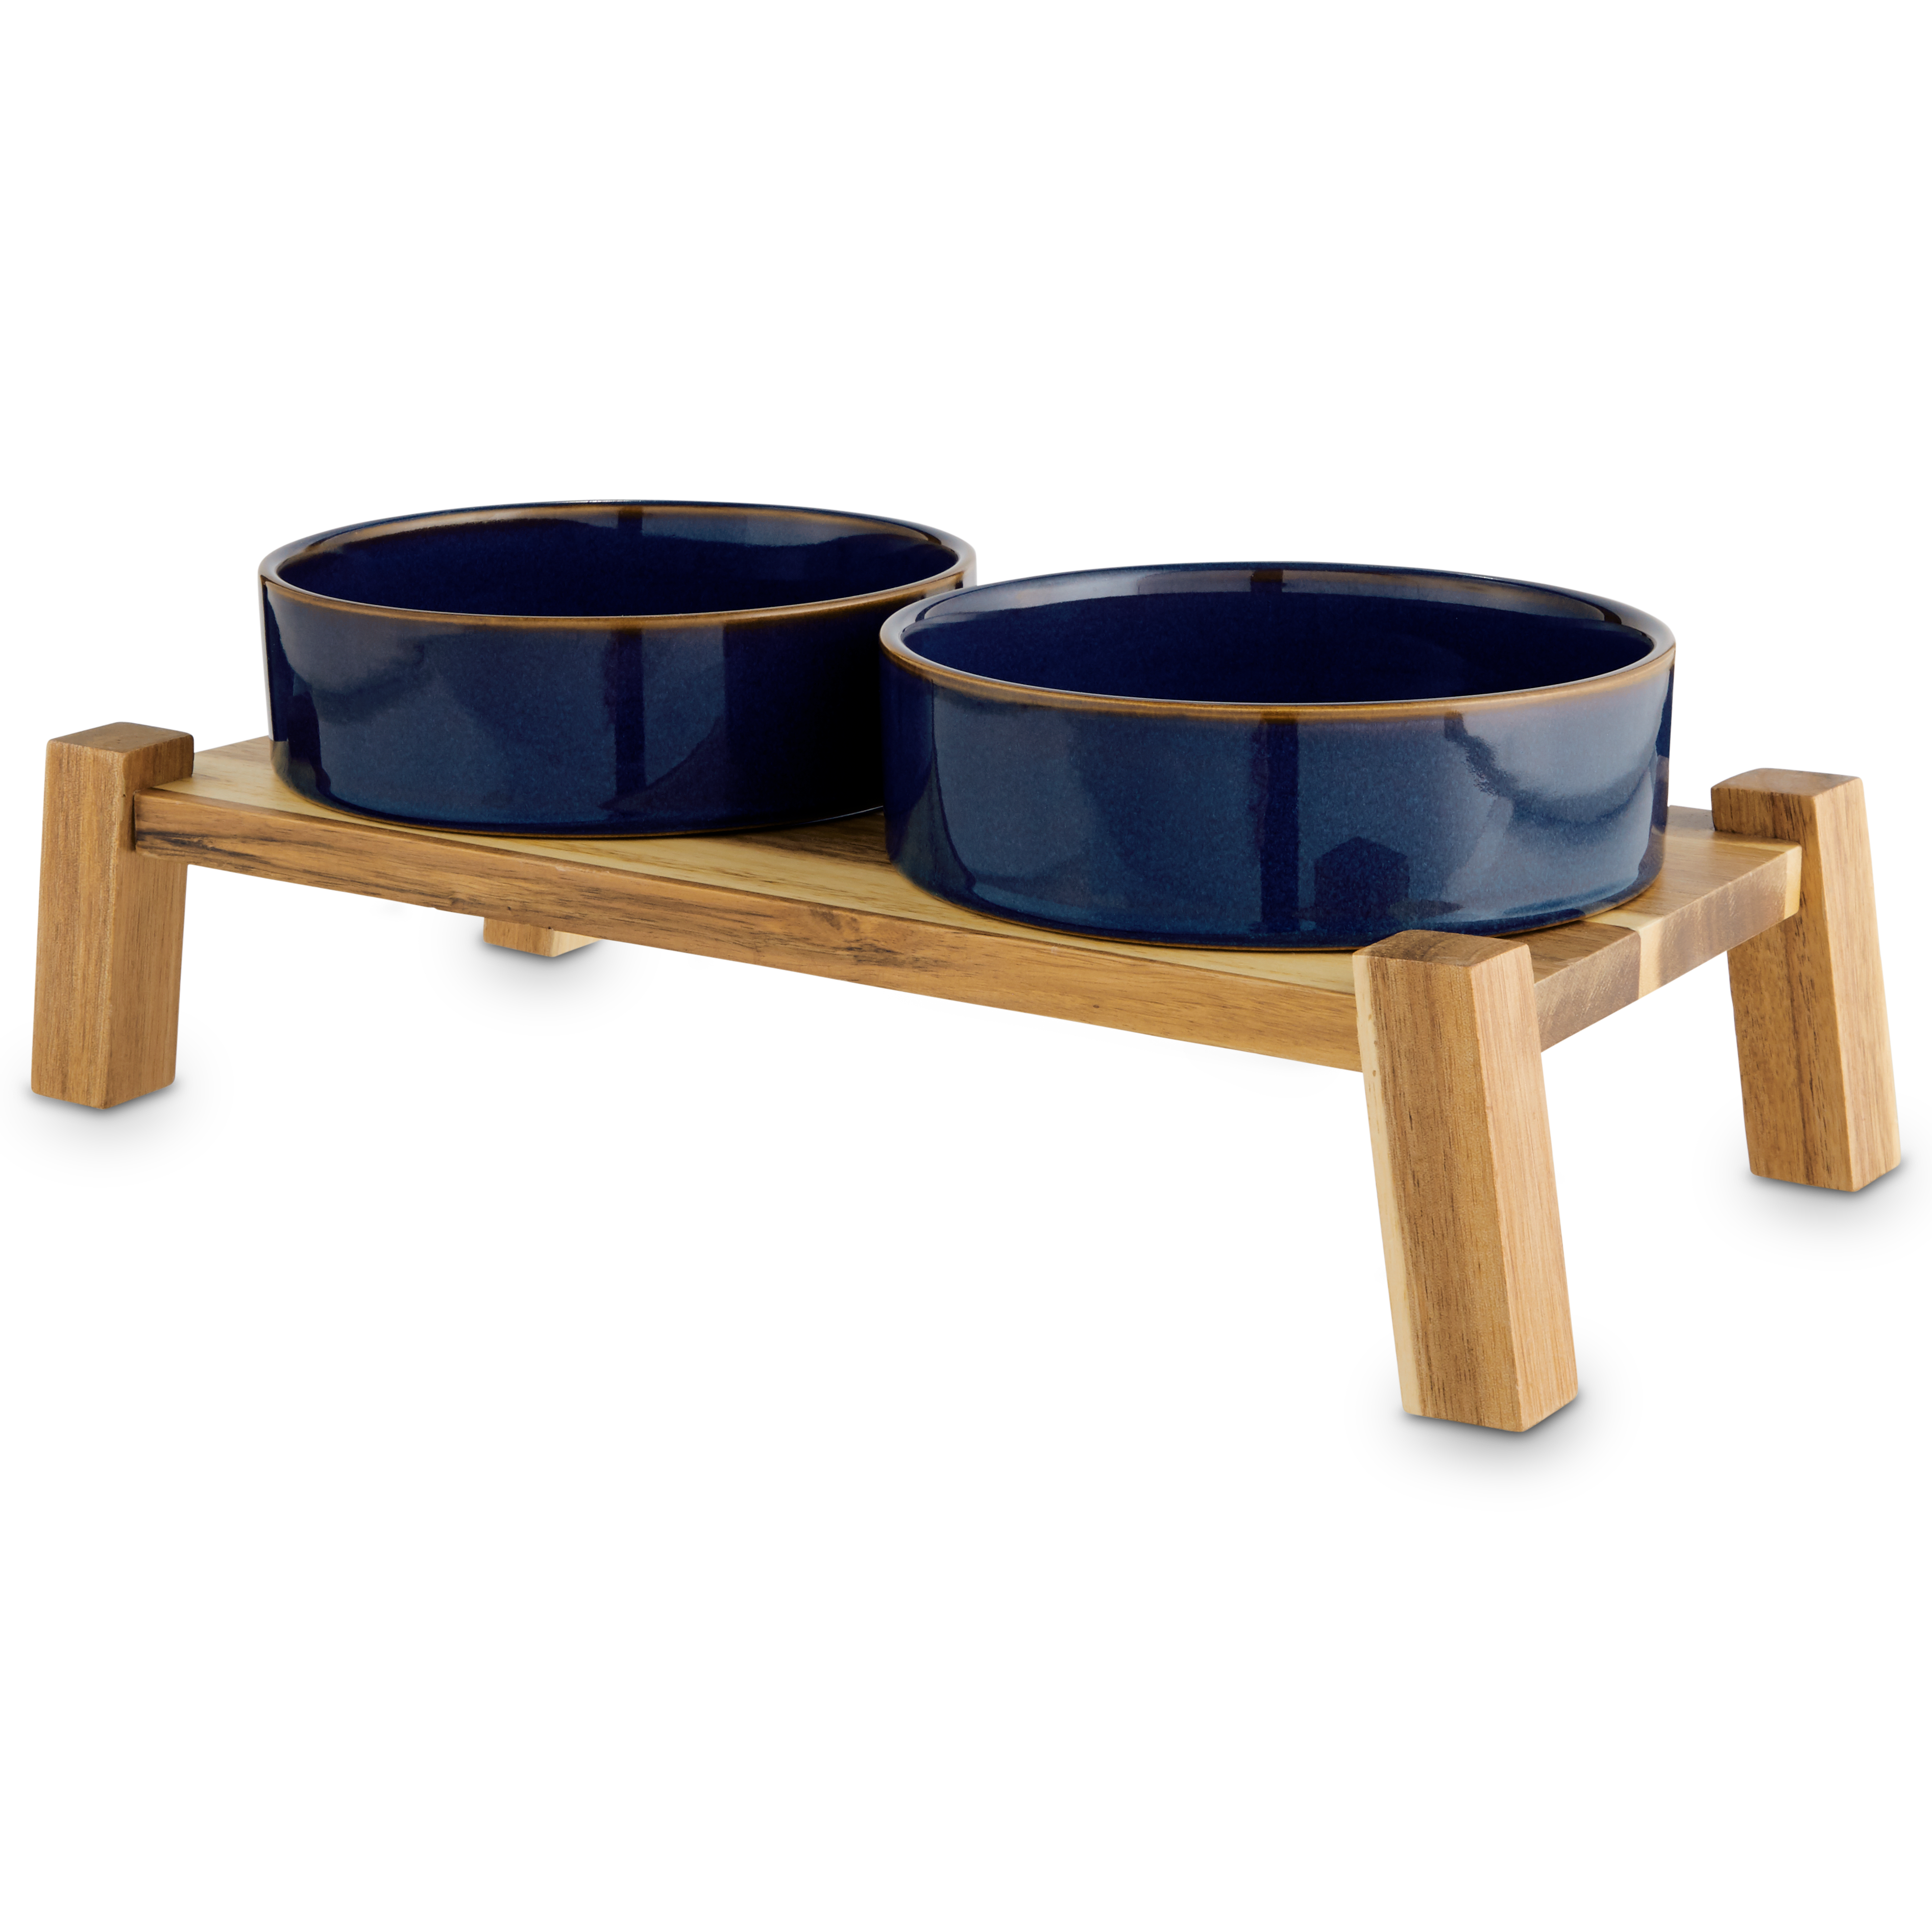 Dog Bowls,Black Ceramic Cat Dog Bowl Set with Wood Stand for Food and Water